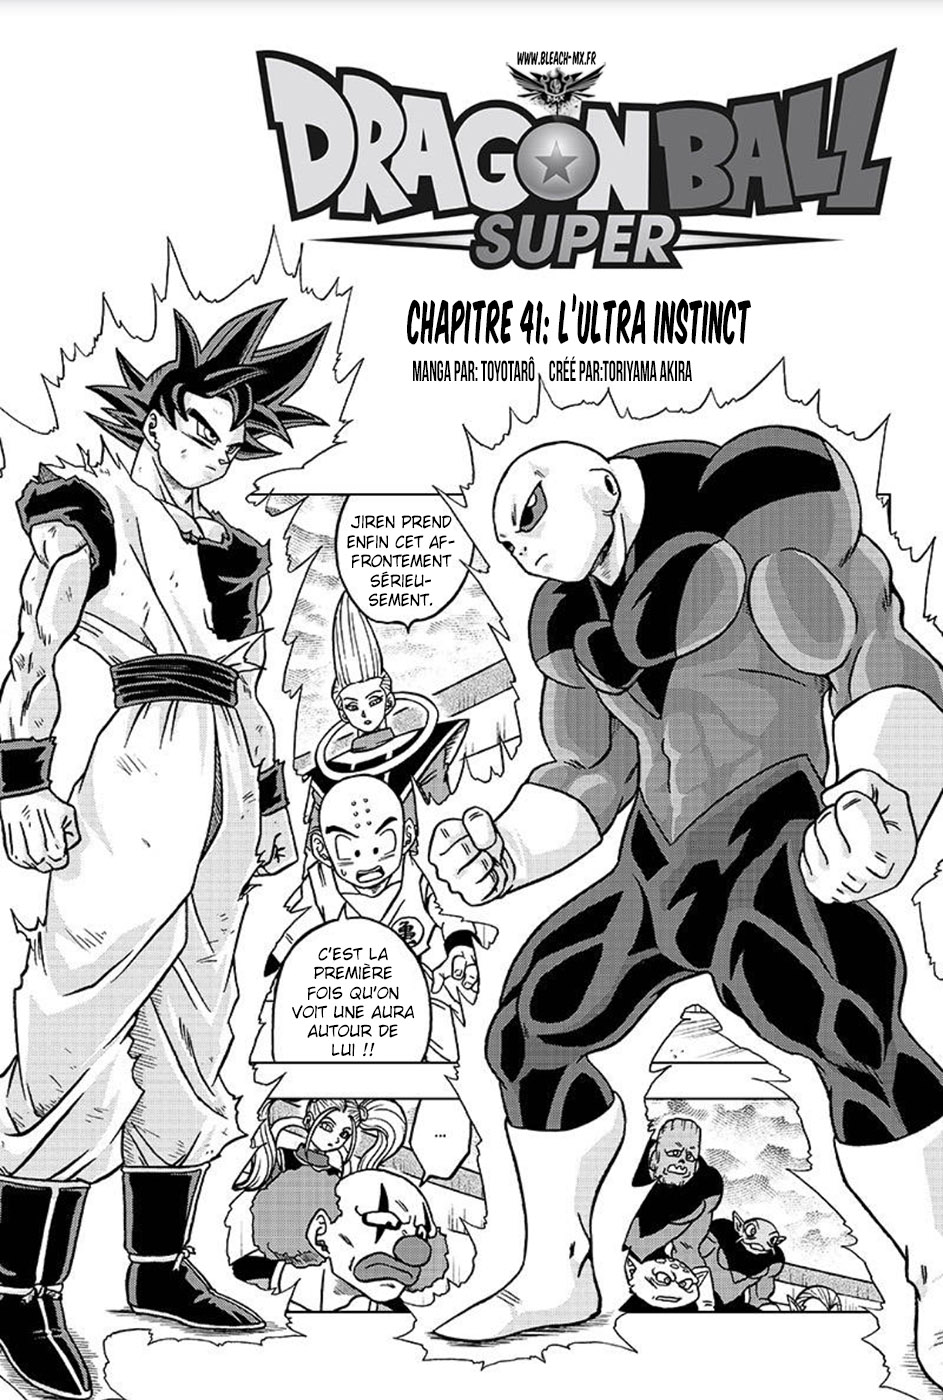 Dragon Ball Super: Chapter chapitre-41 - Page 1